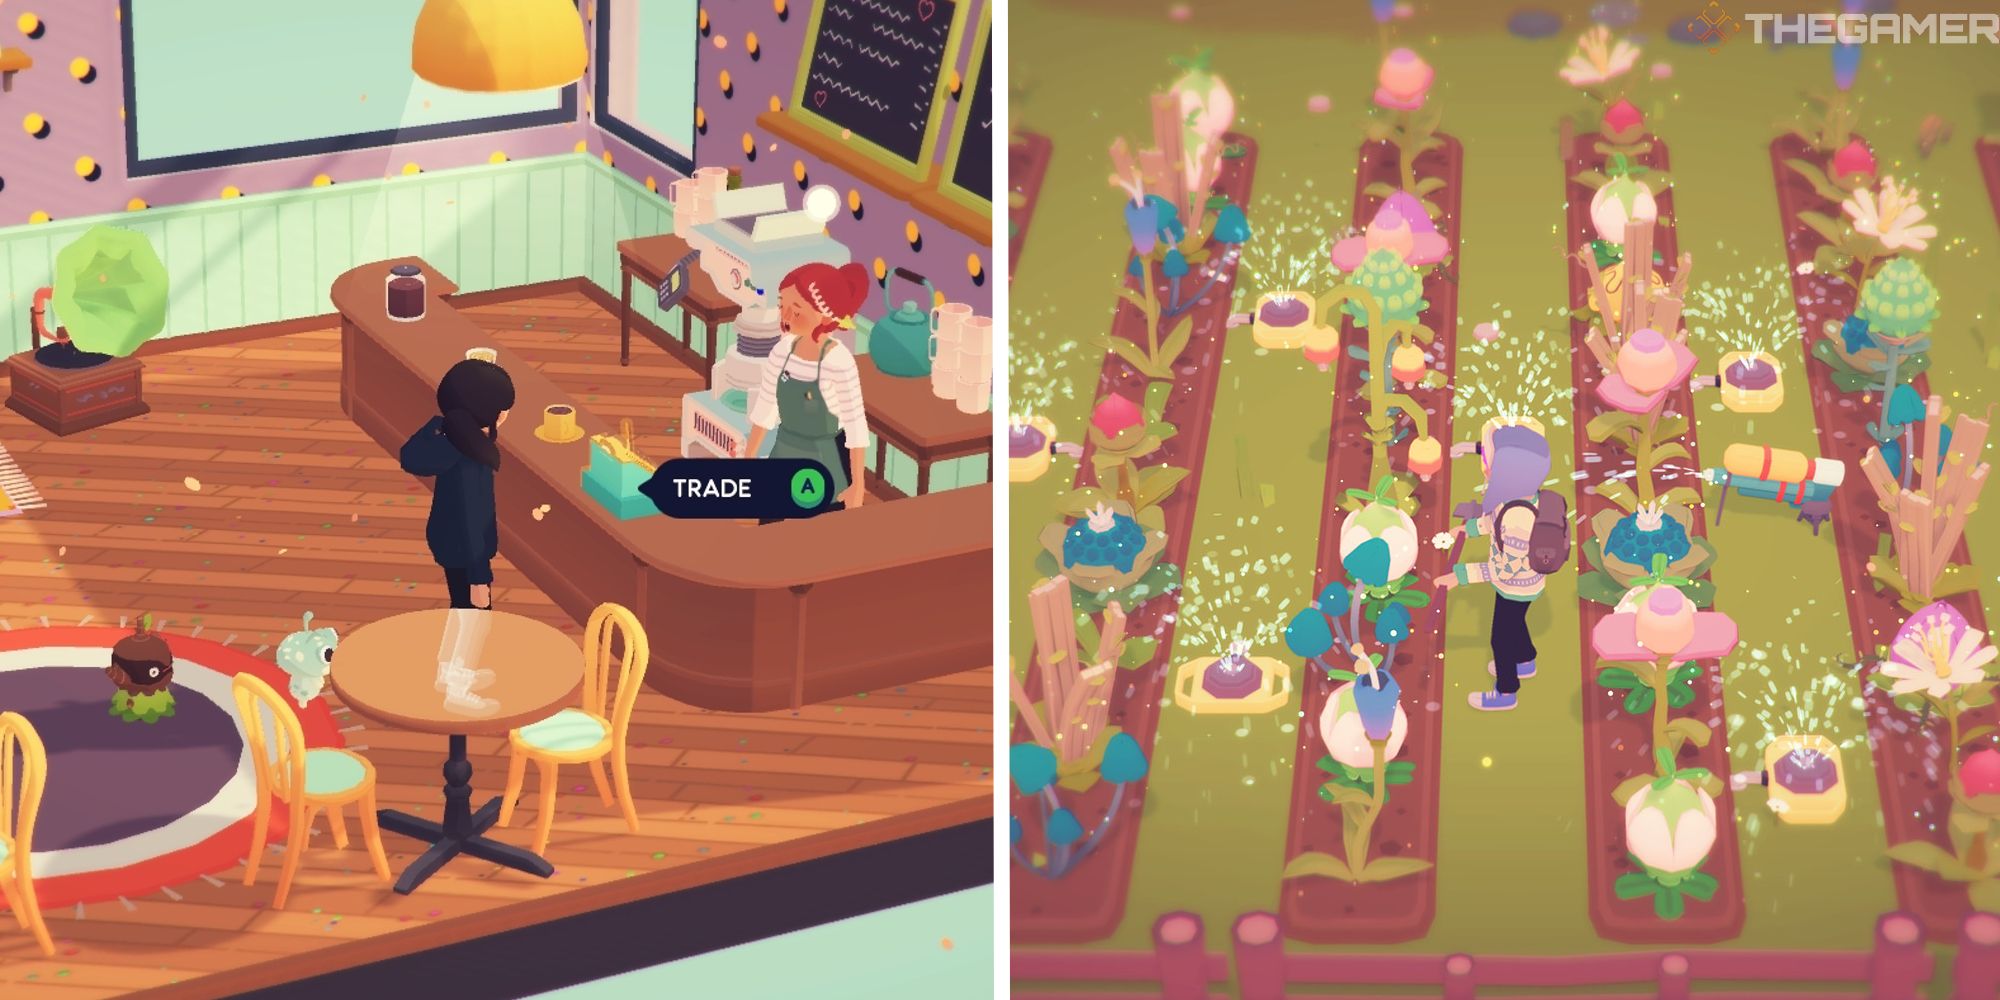 image of player at cafe next to image of player farming 